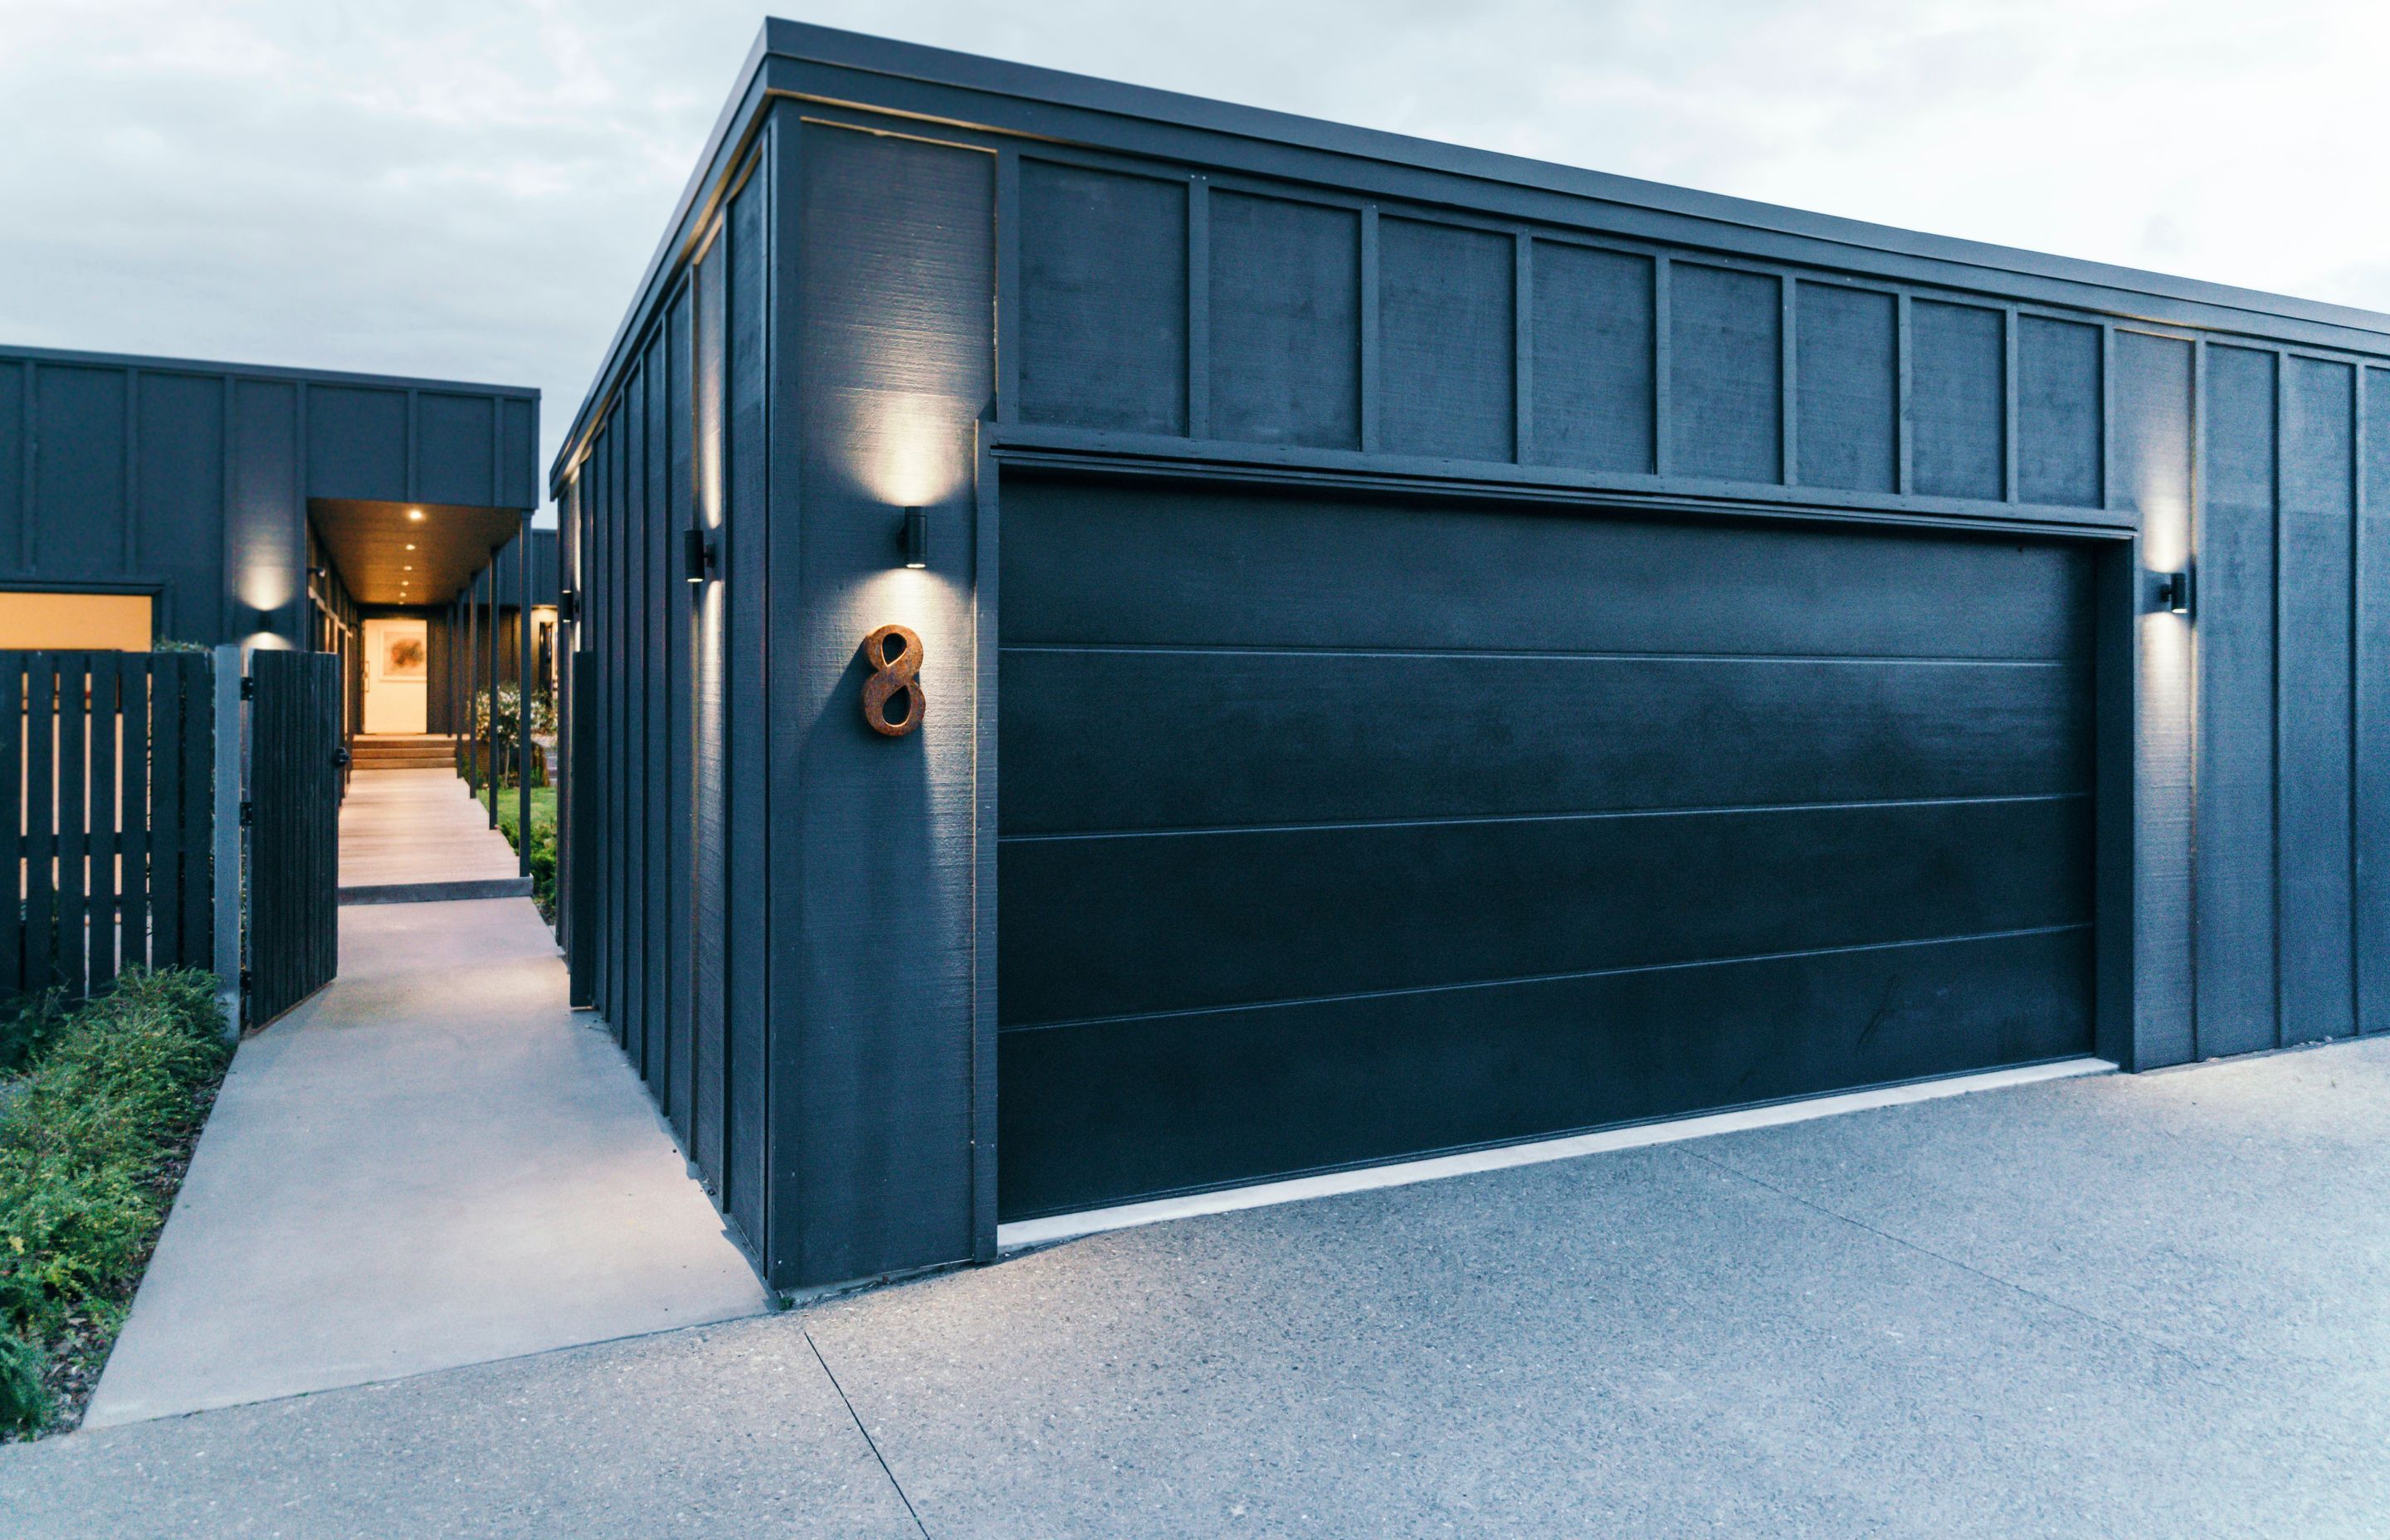 The new garage was placed in front of the property to act as a buffer between the house and the street and also to create an enclosed, internal courtyard.